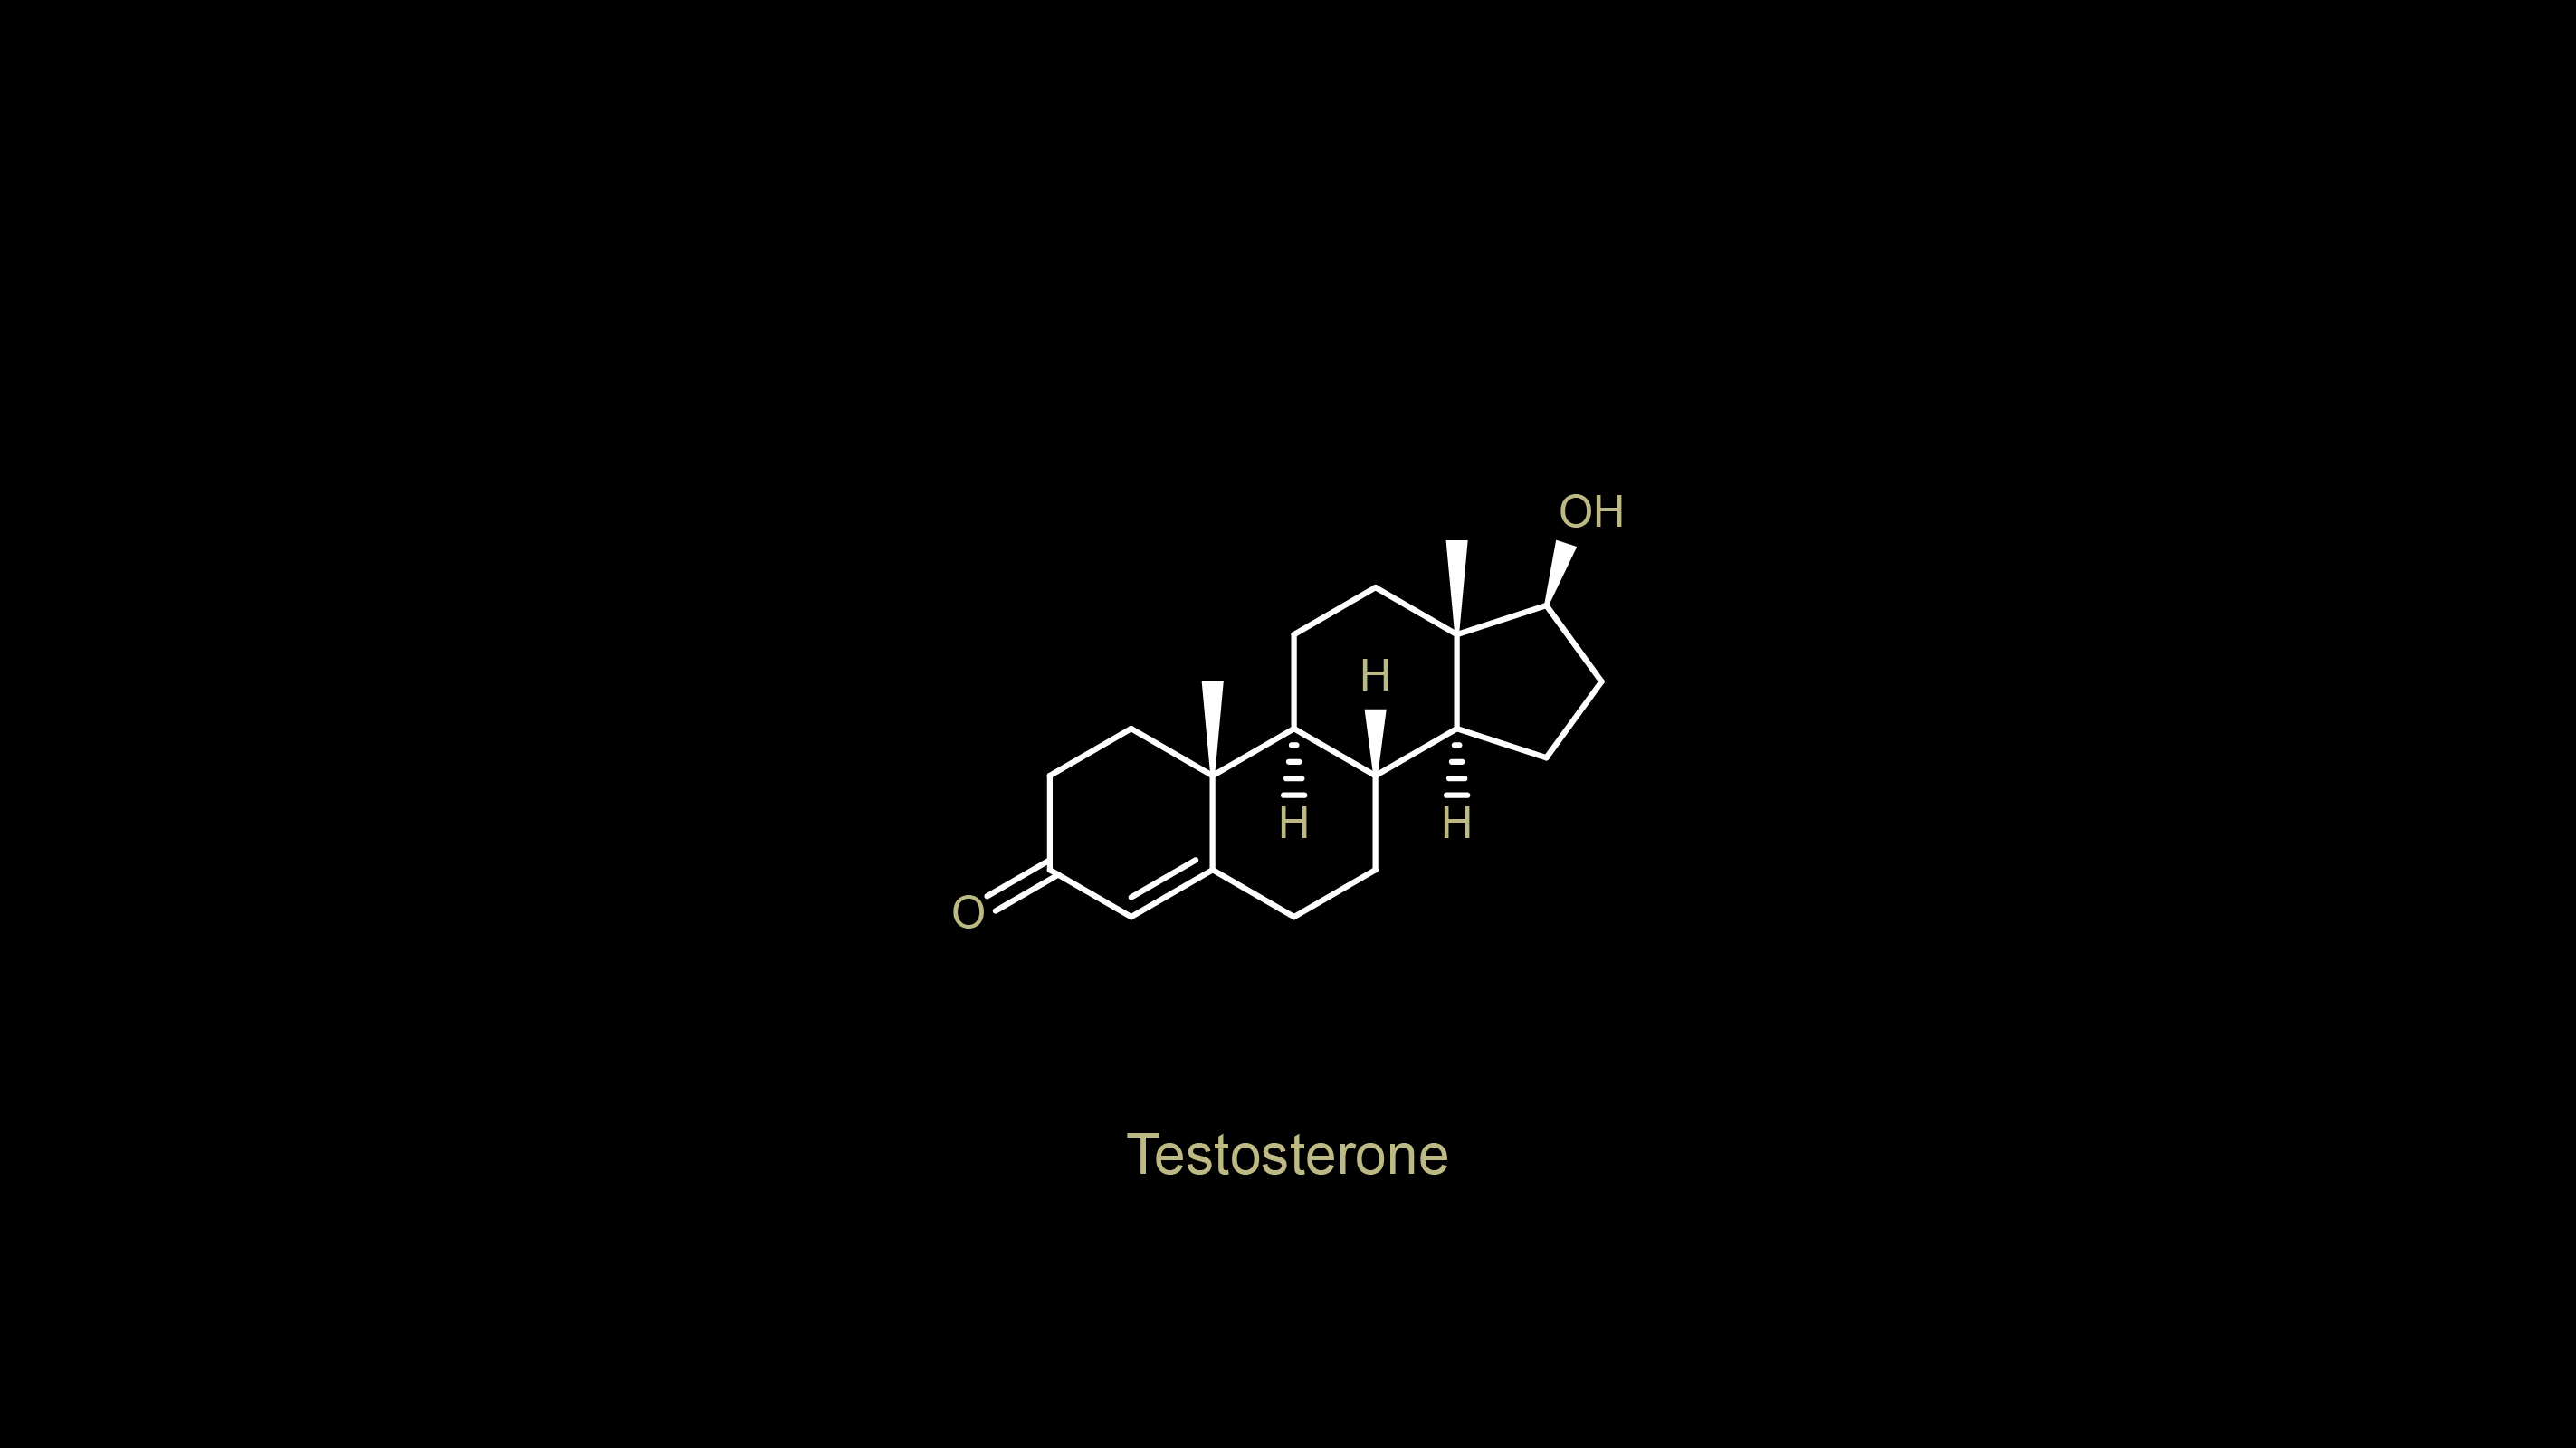 A chemical structure of testosterone is shown on a black background. - Chemistry